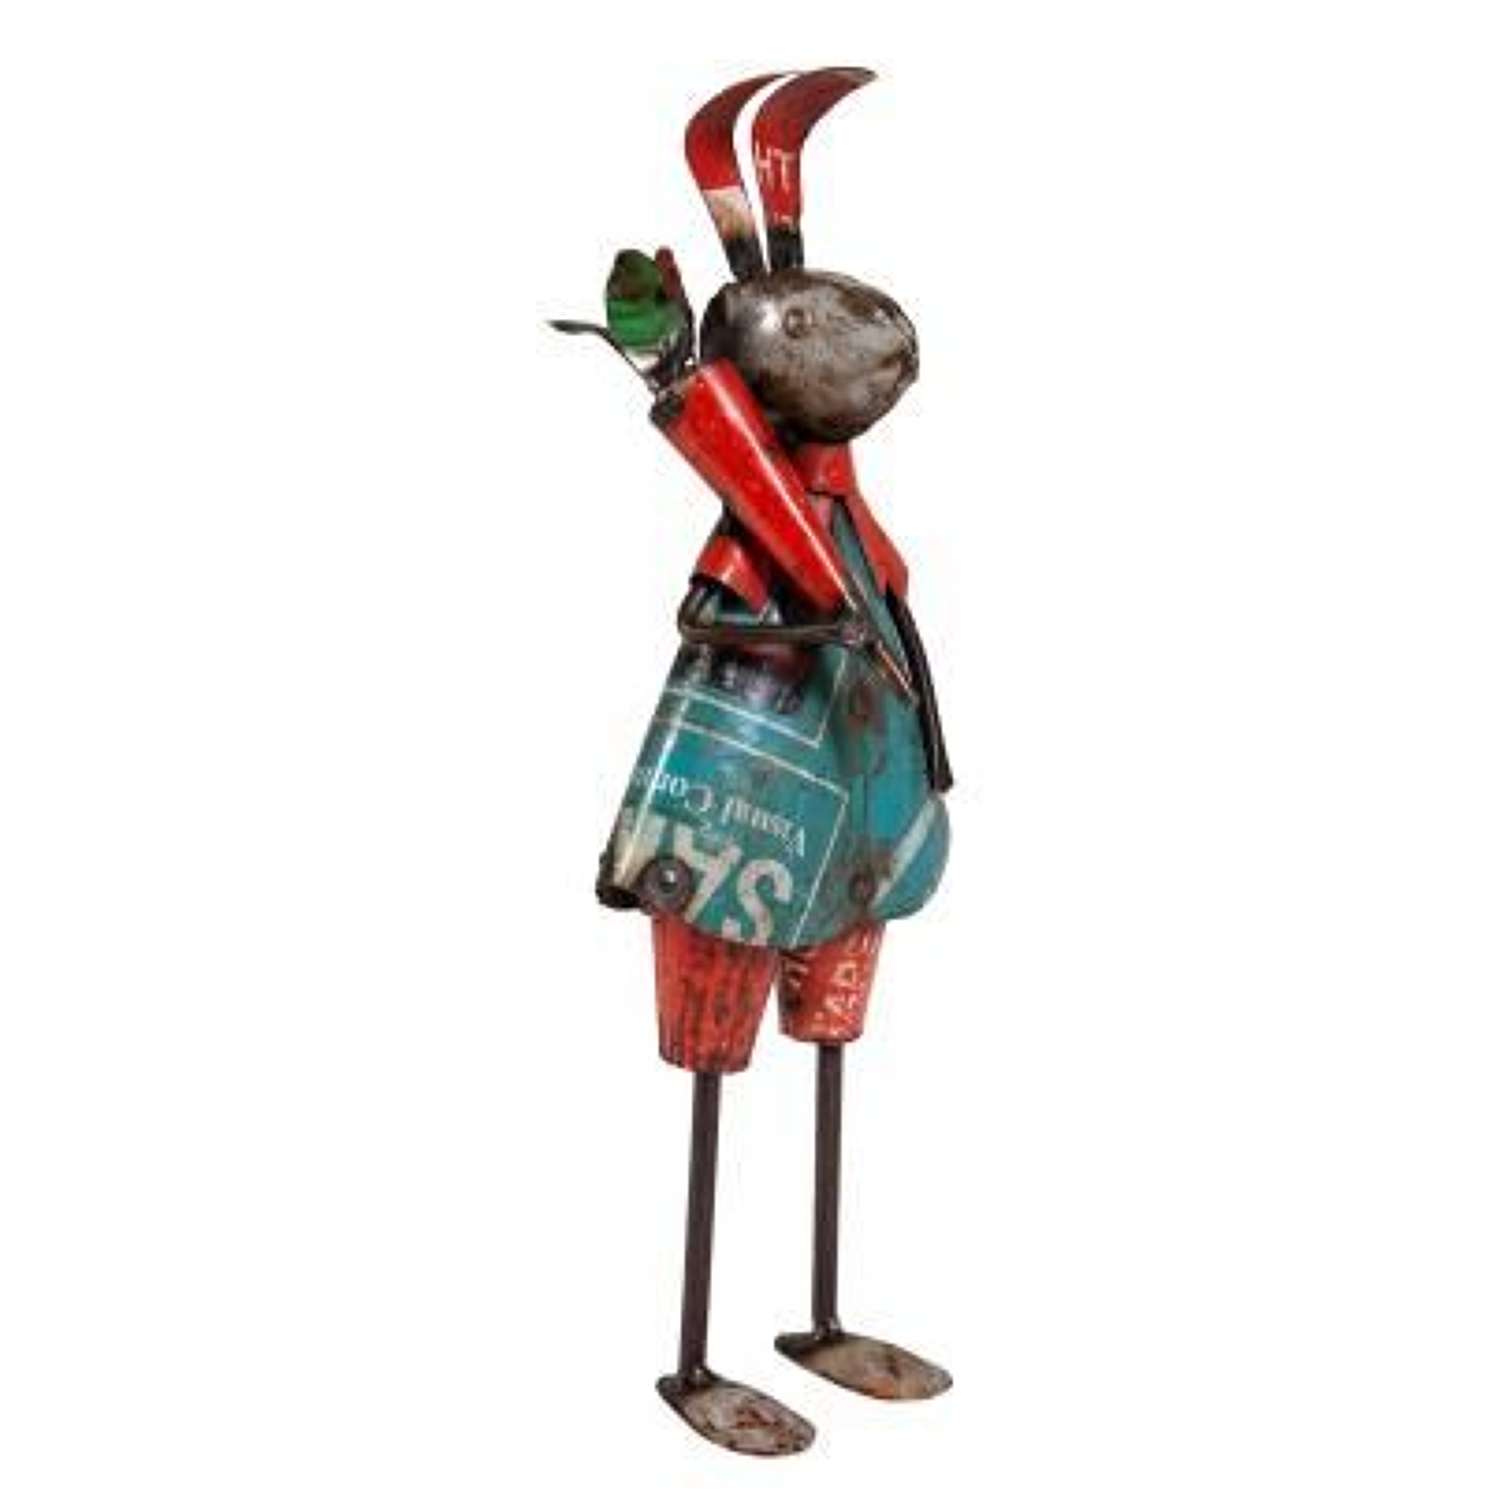 Recycled Iron Rabbit with Carrot. Ref MH-6040